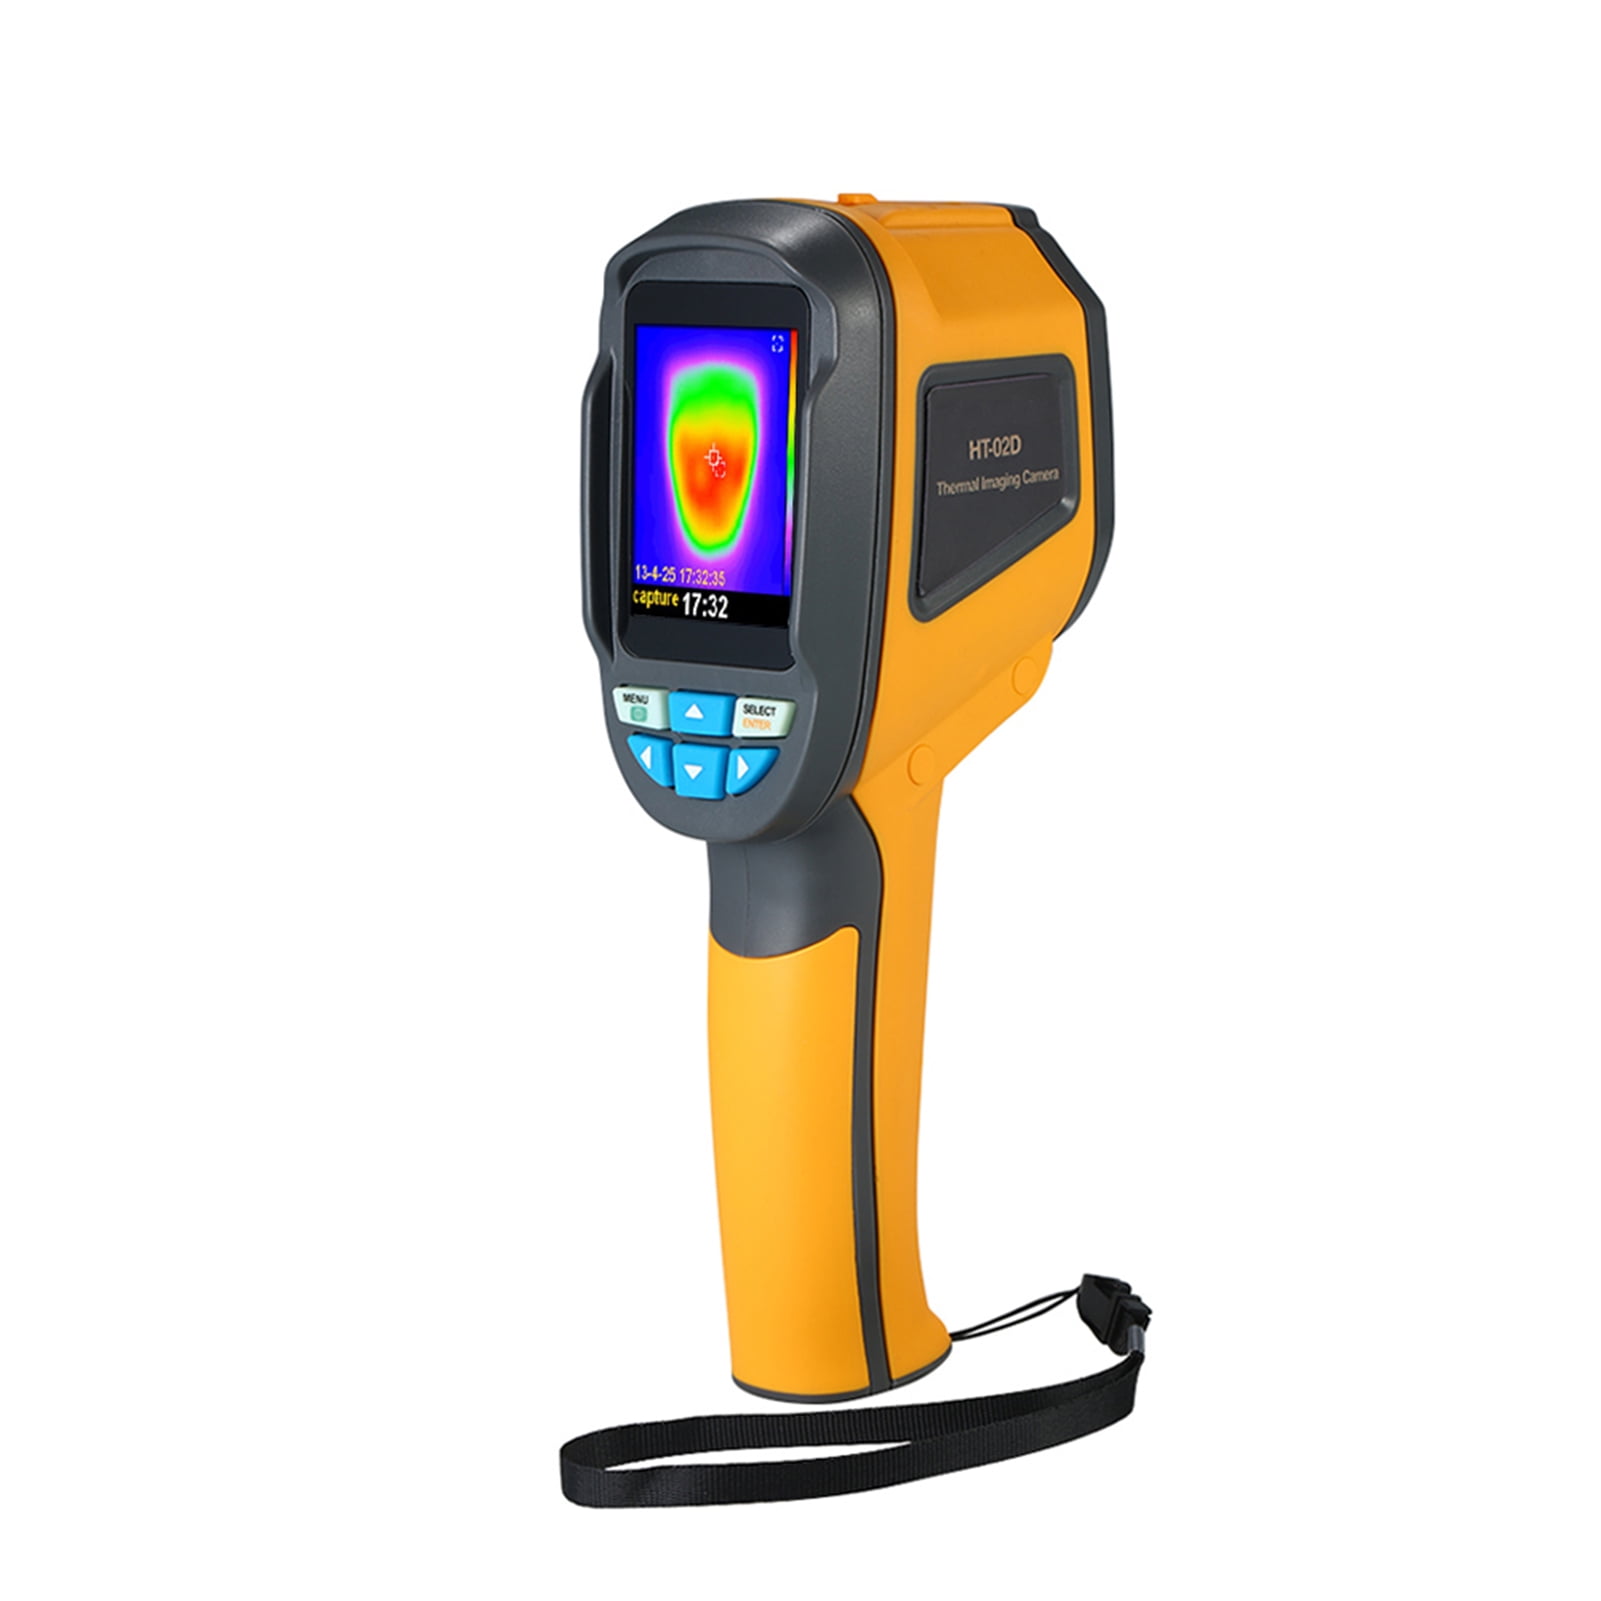 Portable Handheld Thermal Imaging Camera with 2.4 Color Display Screen 33 X 33 IR Resolution Infrared Thermal Imager 